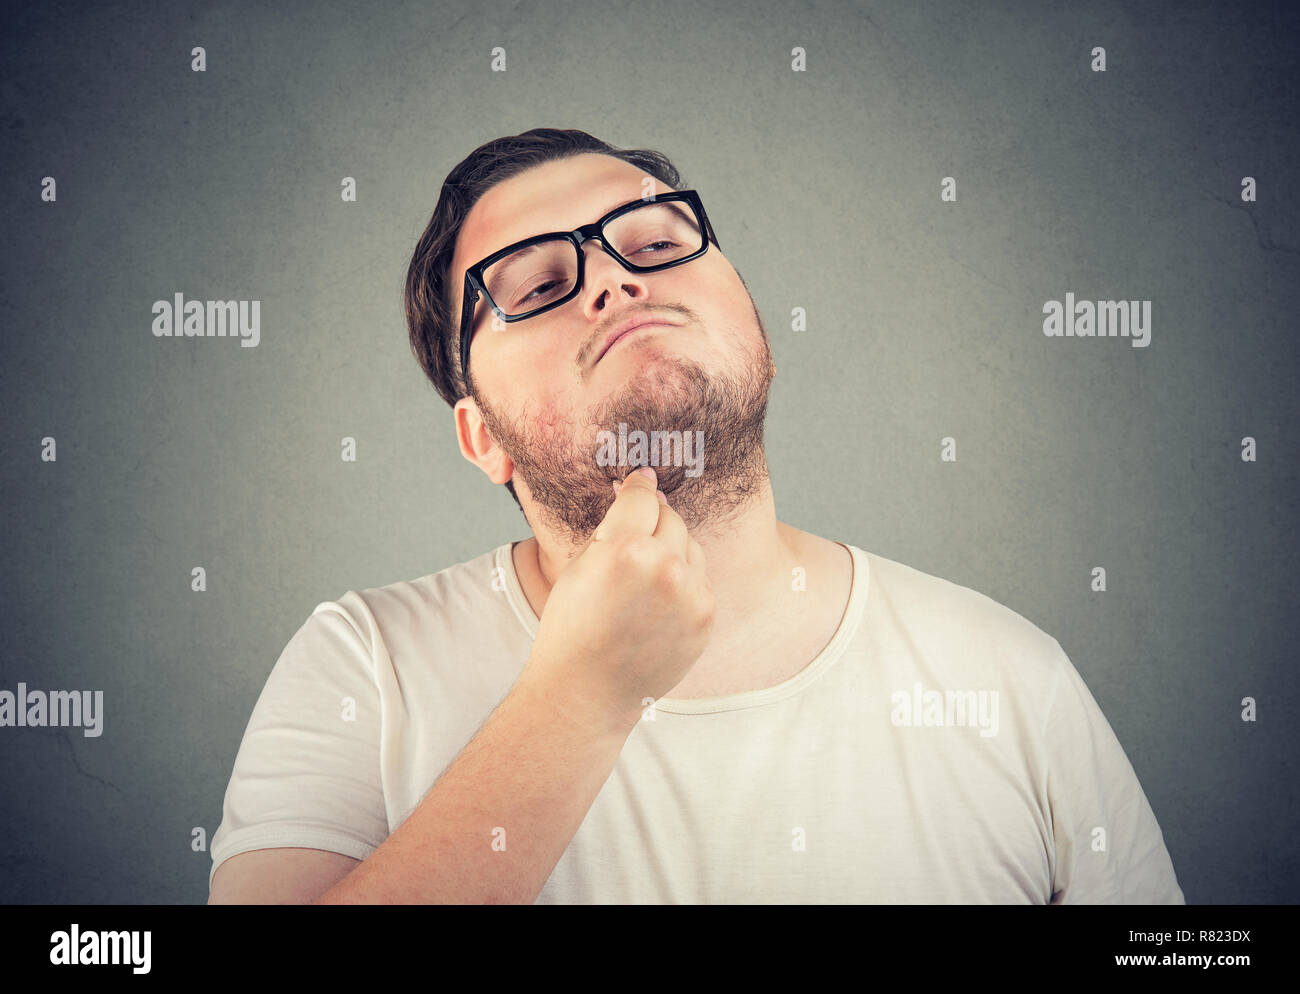 Adult chubby man in glasses rubbing double chin looking away and thinking on gray background Stock Photo